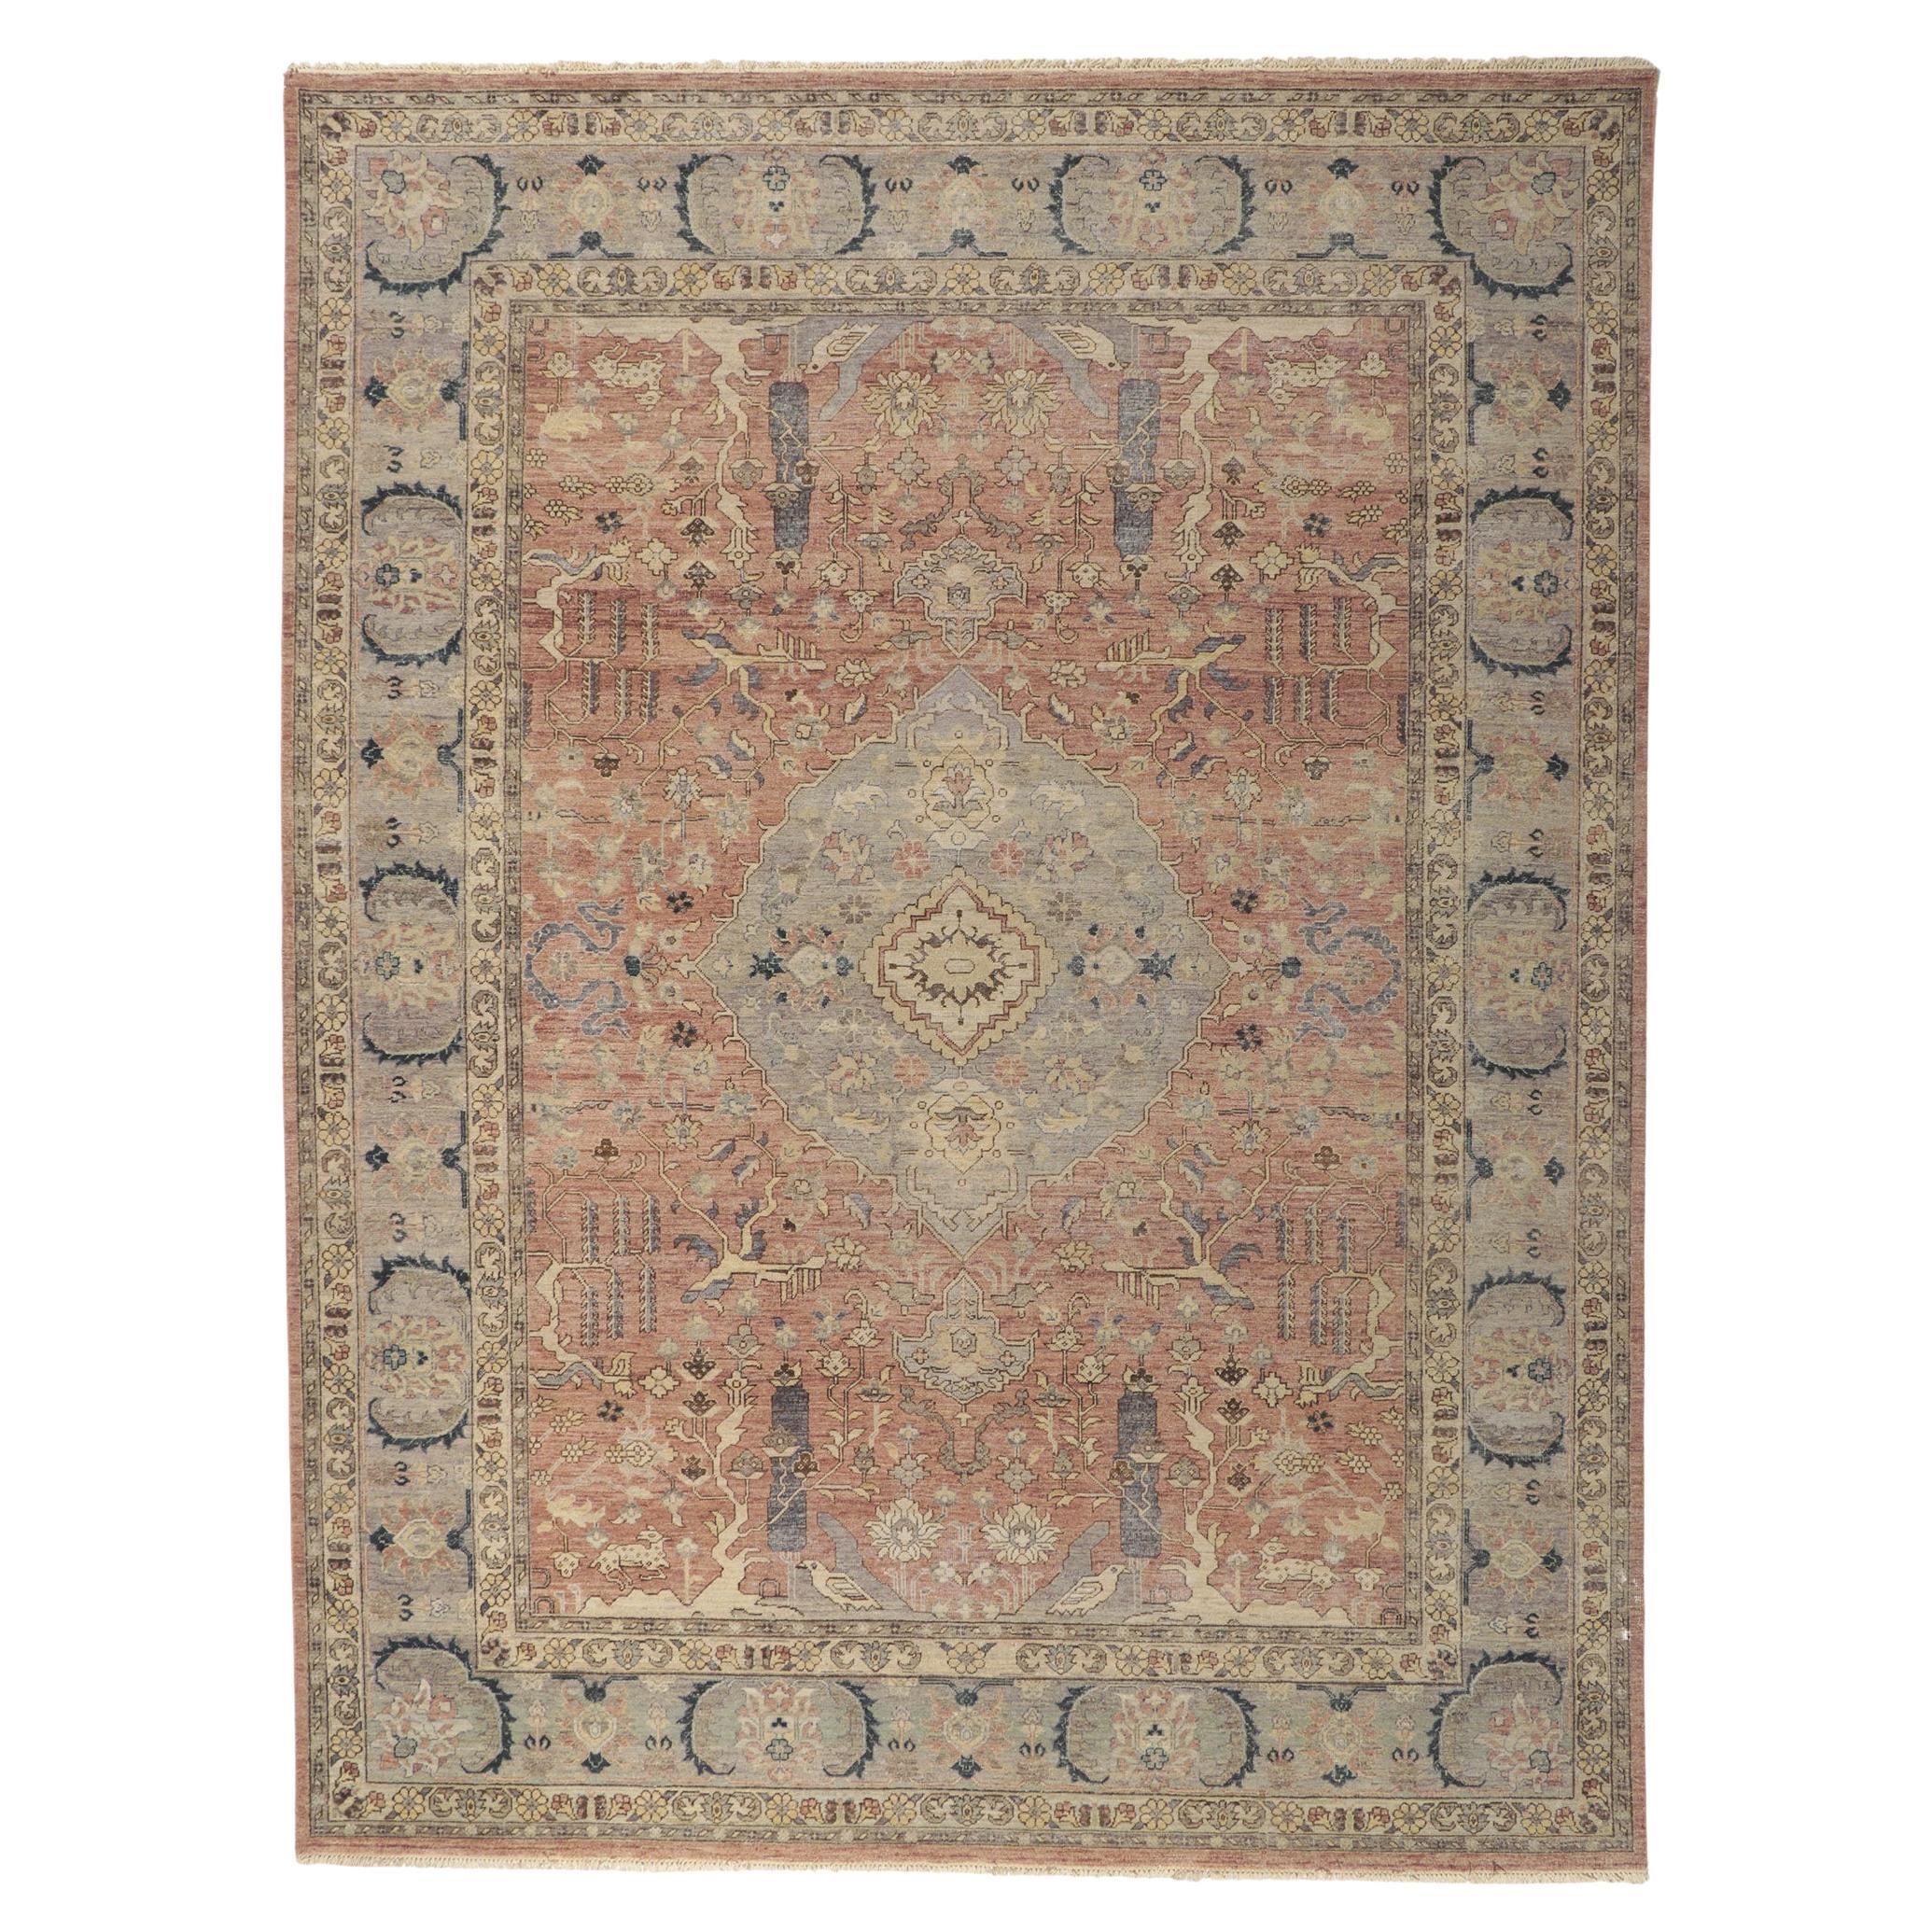 New Vintage-Style Distressed Rug with Soft Earth-Tone Colors For Sale